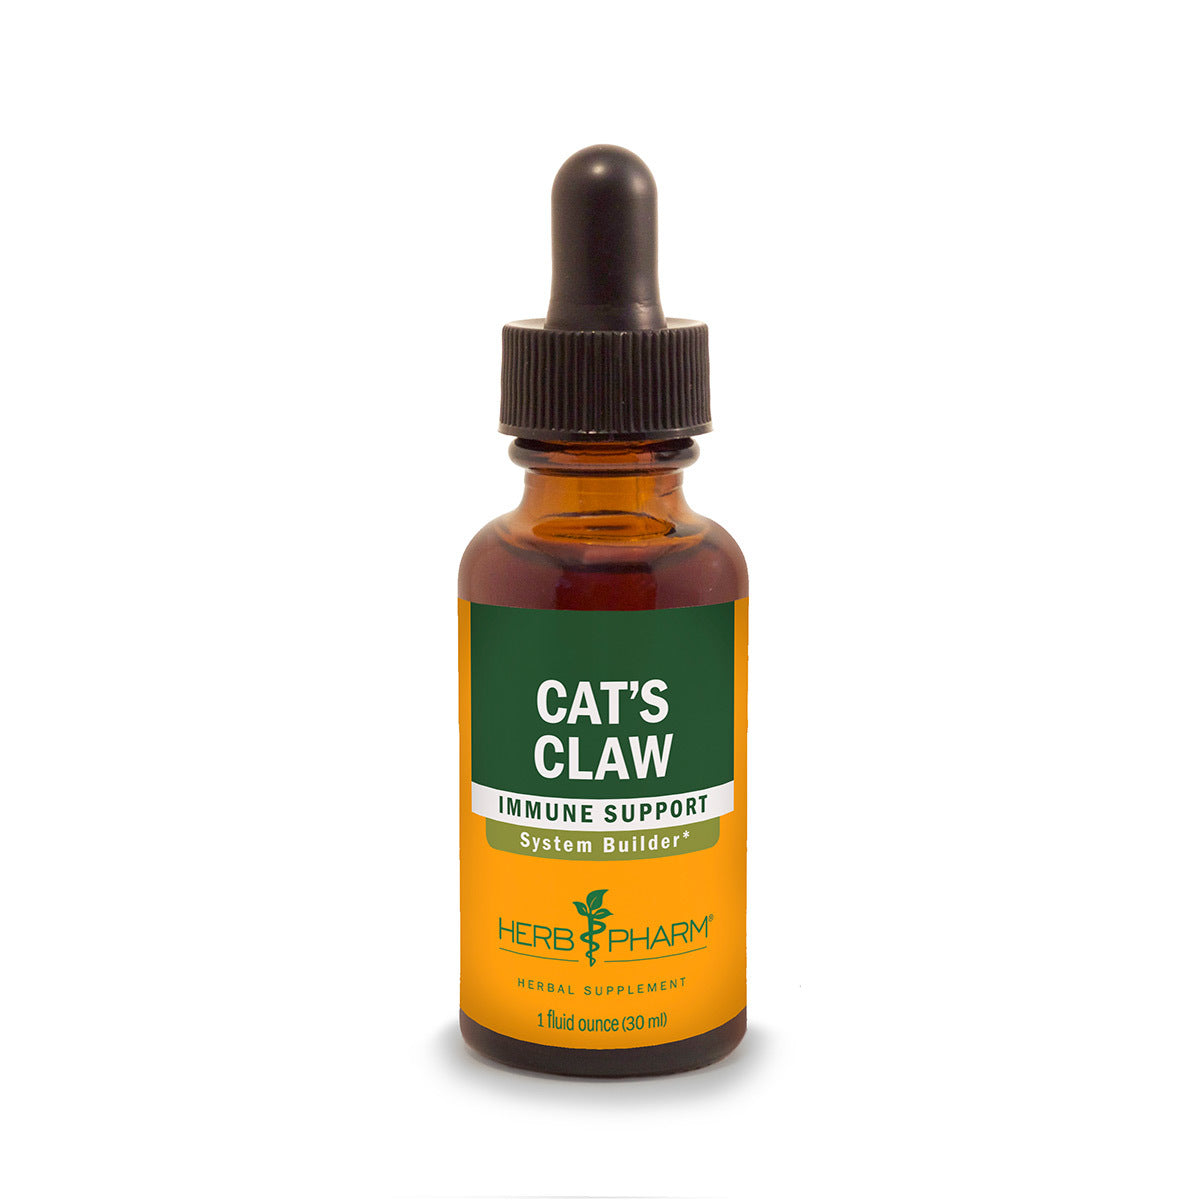 Primary image of Cat's Claw Extract